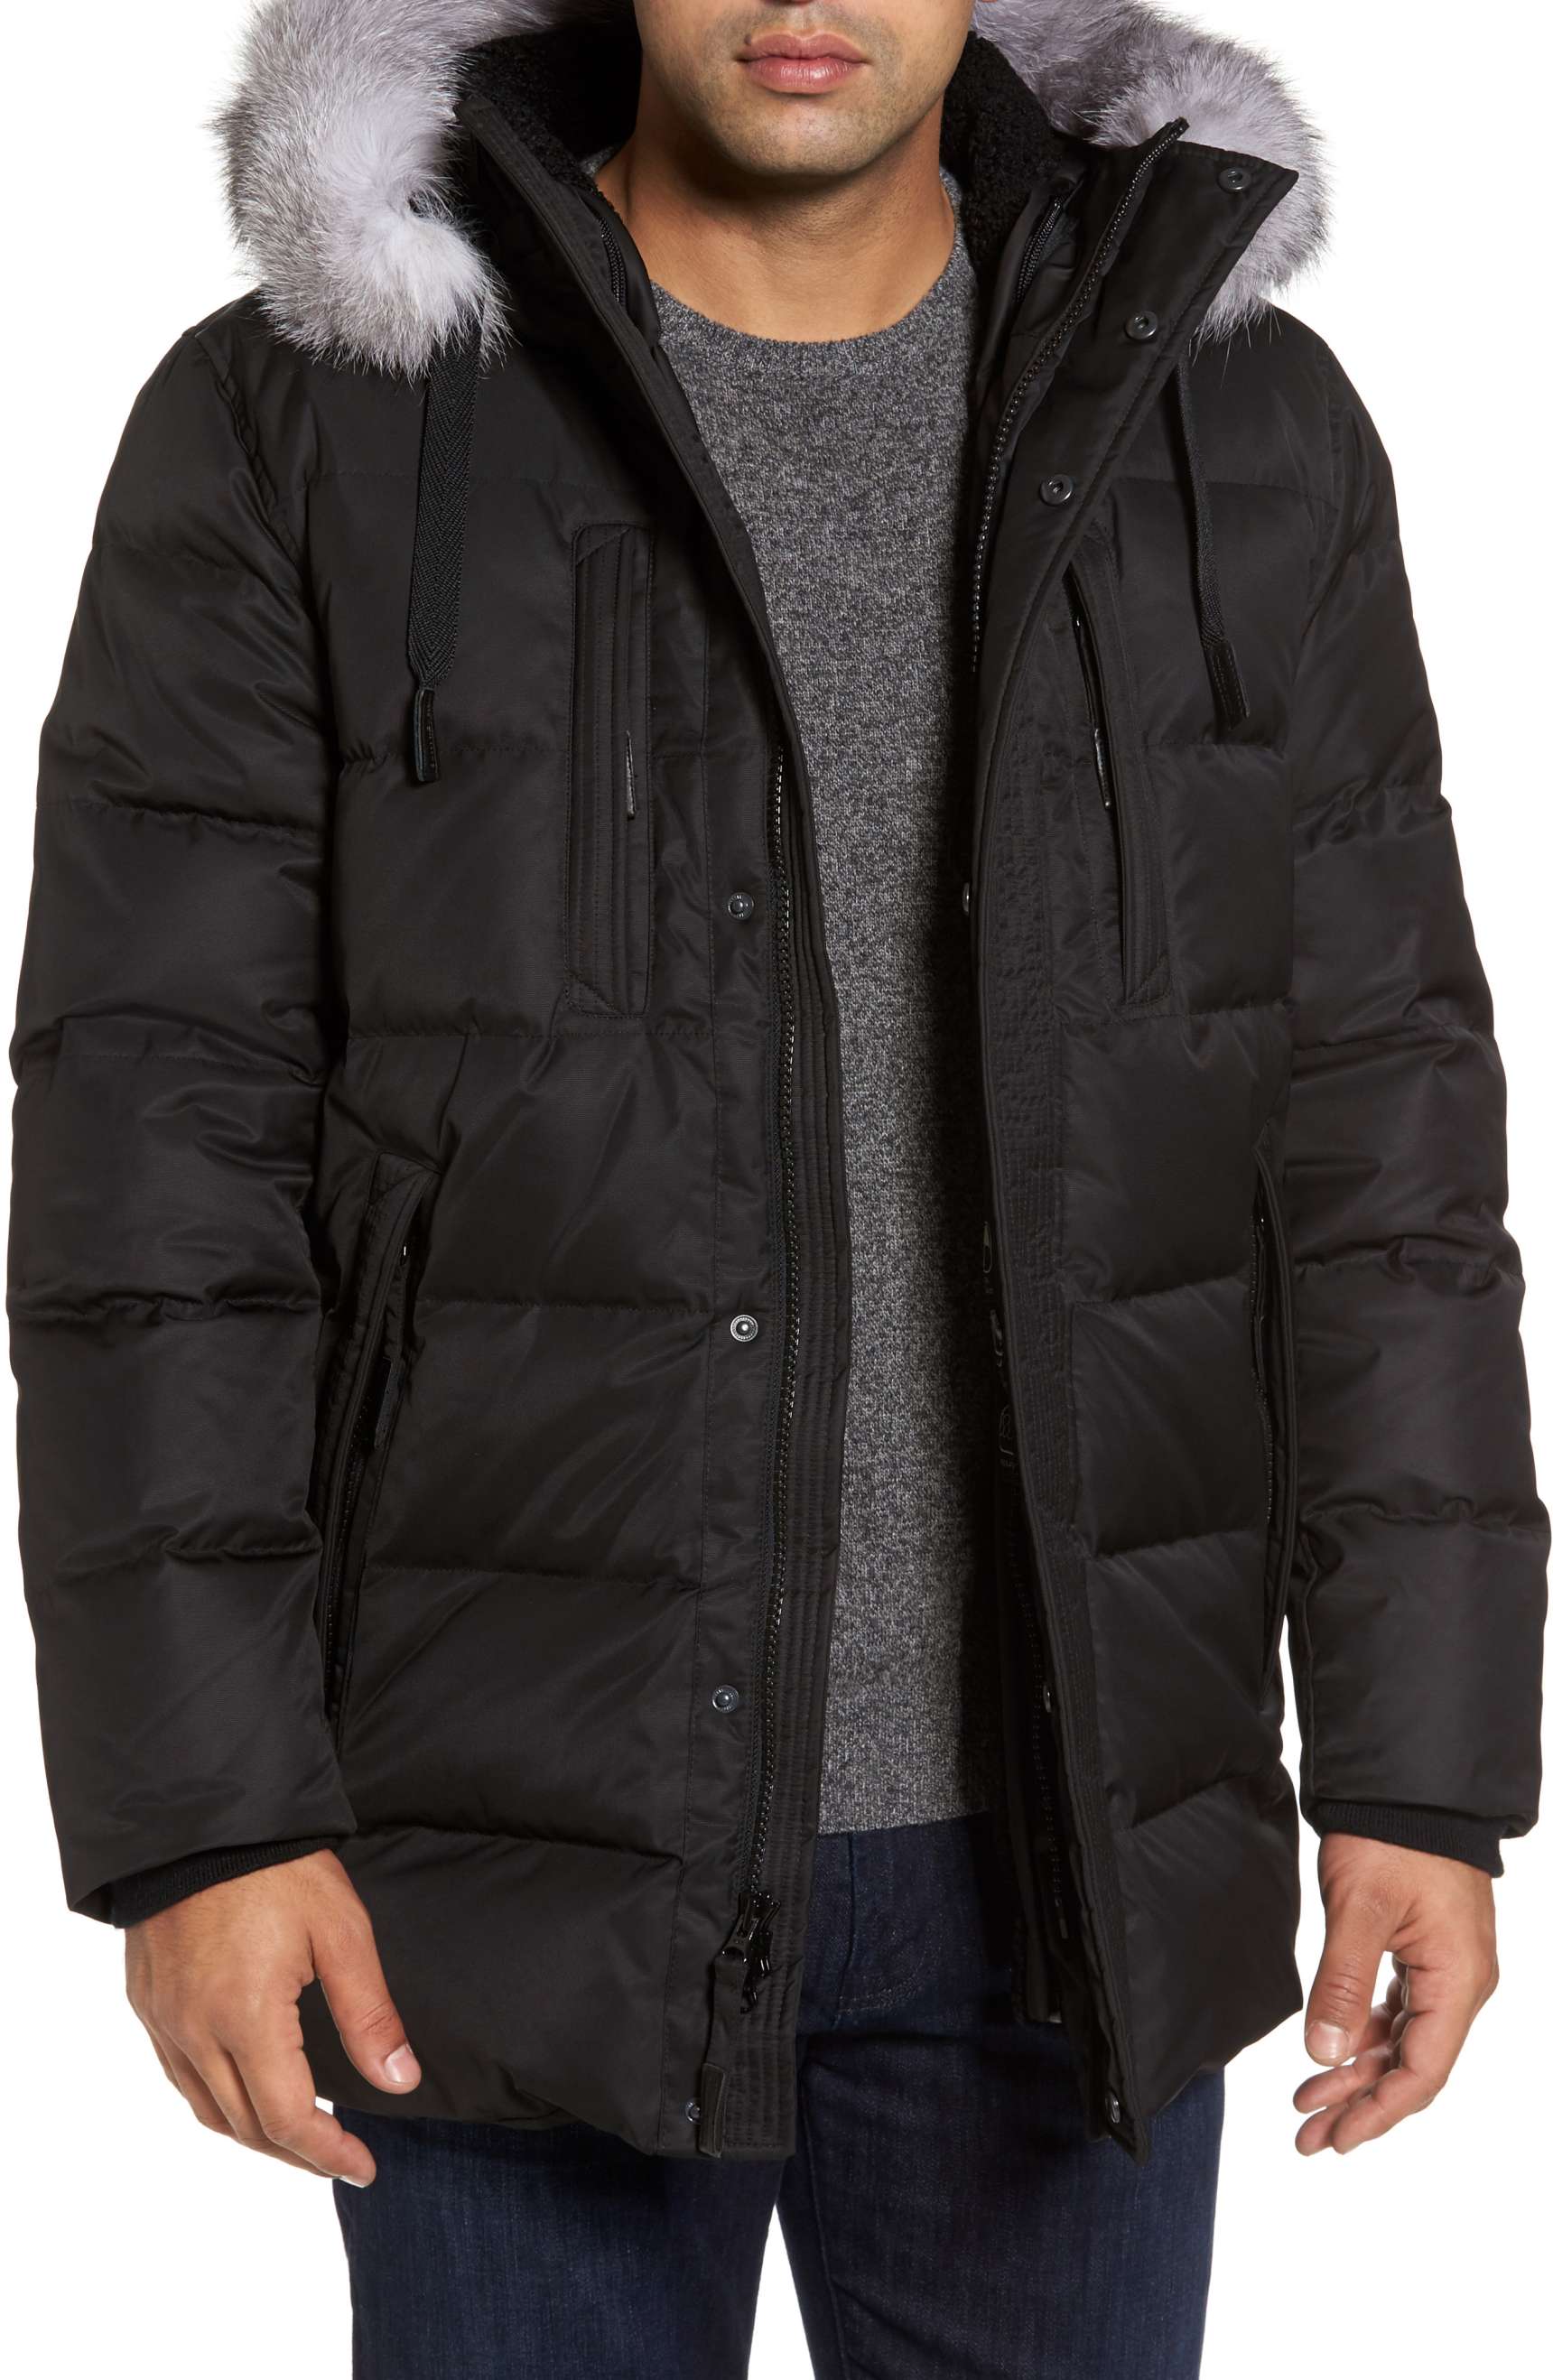 10 Winter Jackets You Need to Survive the Cold Reviewed and